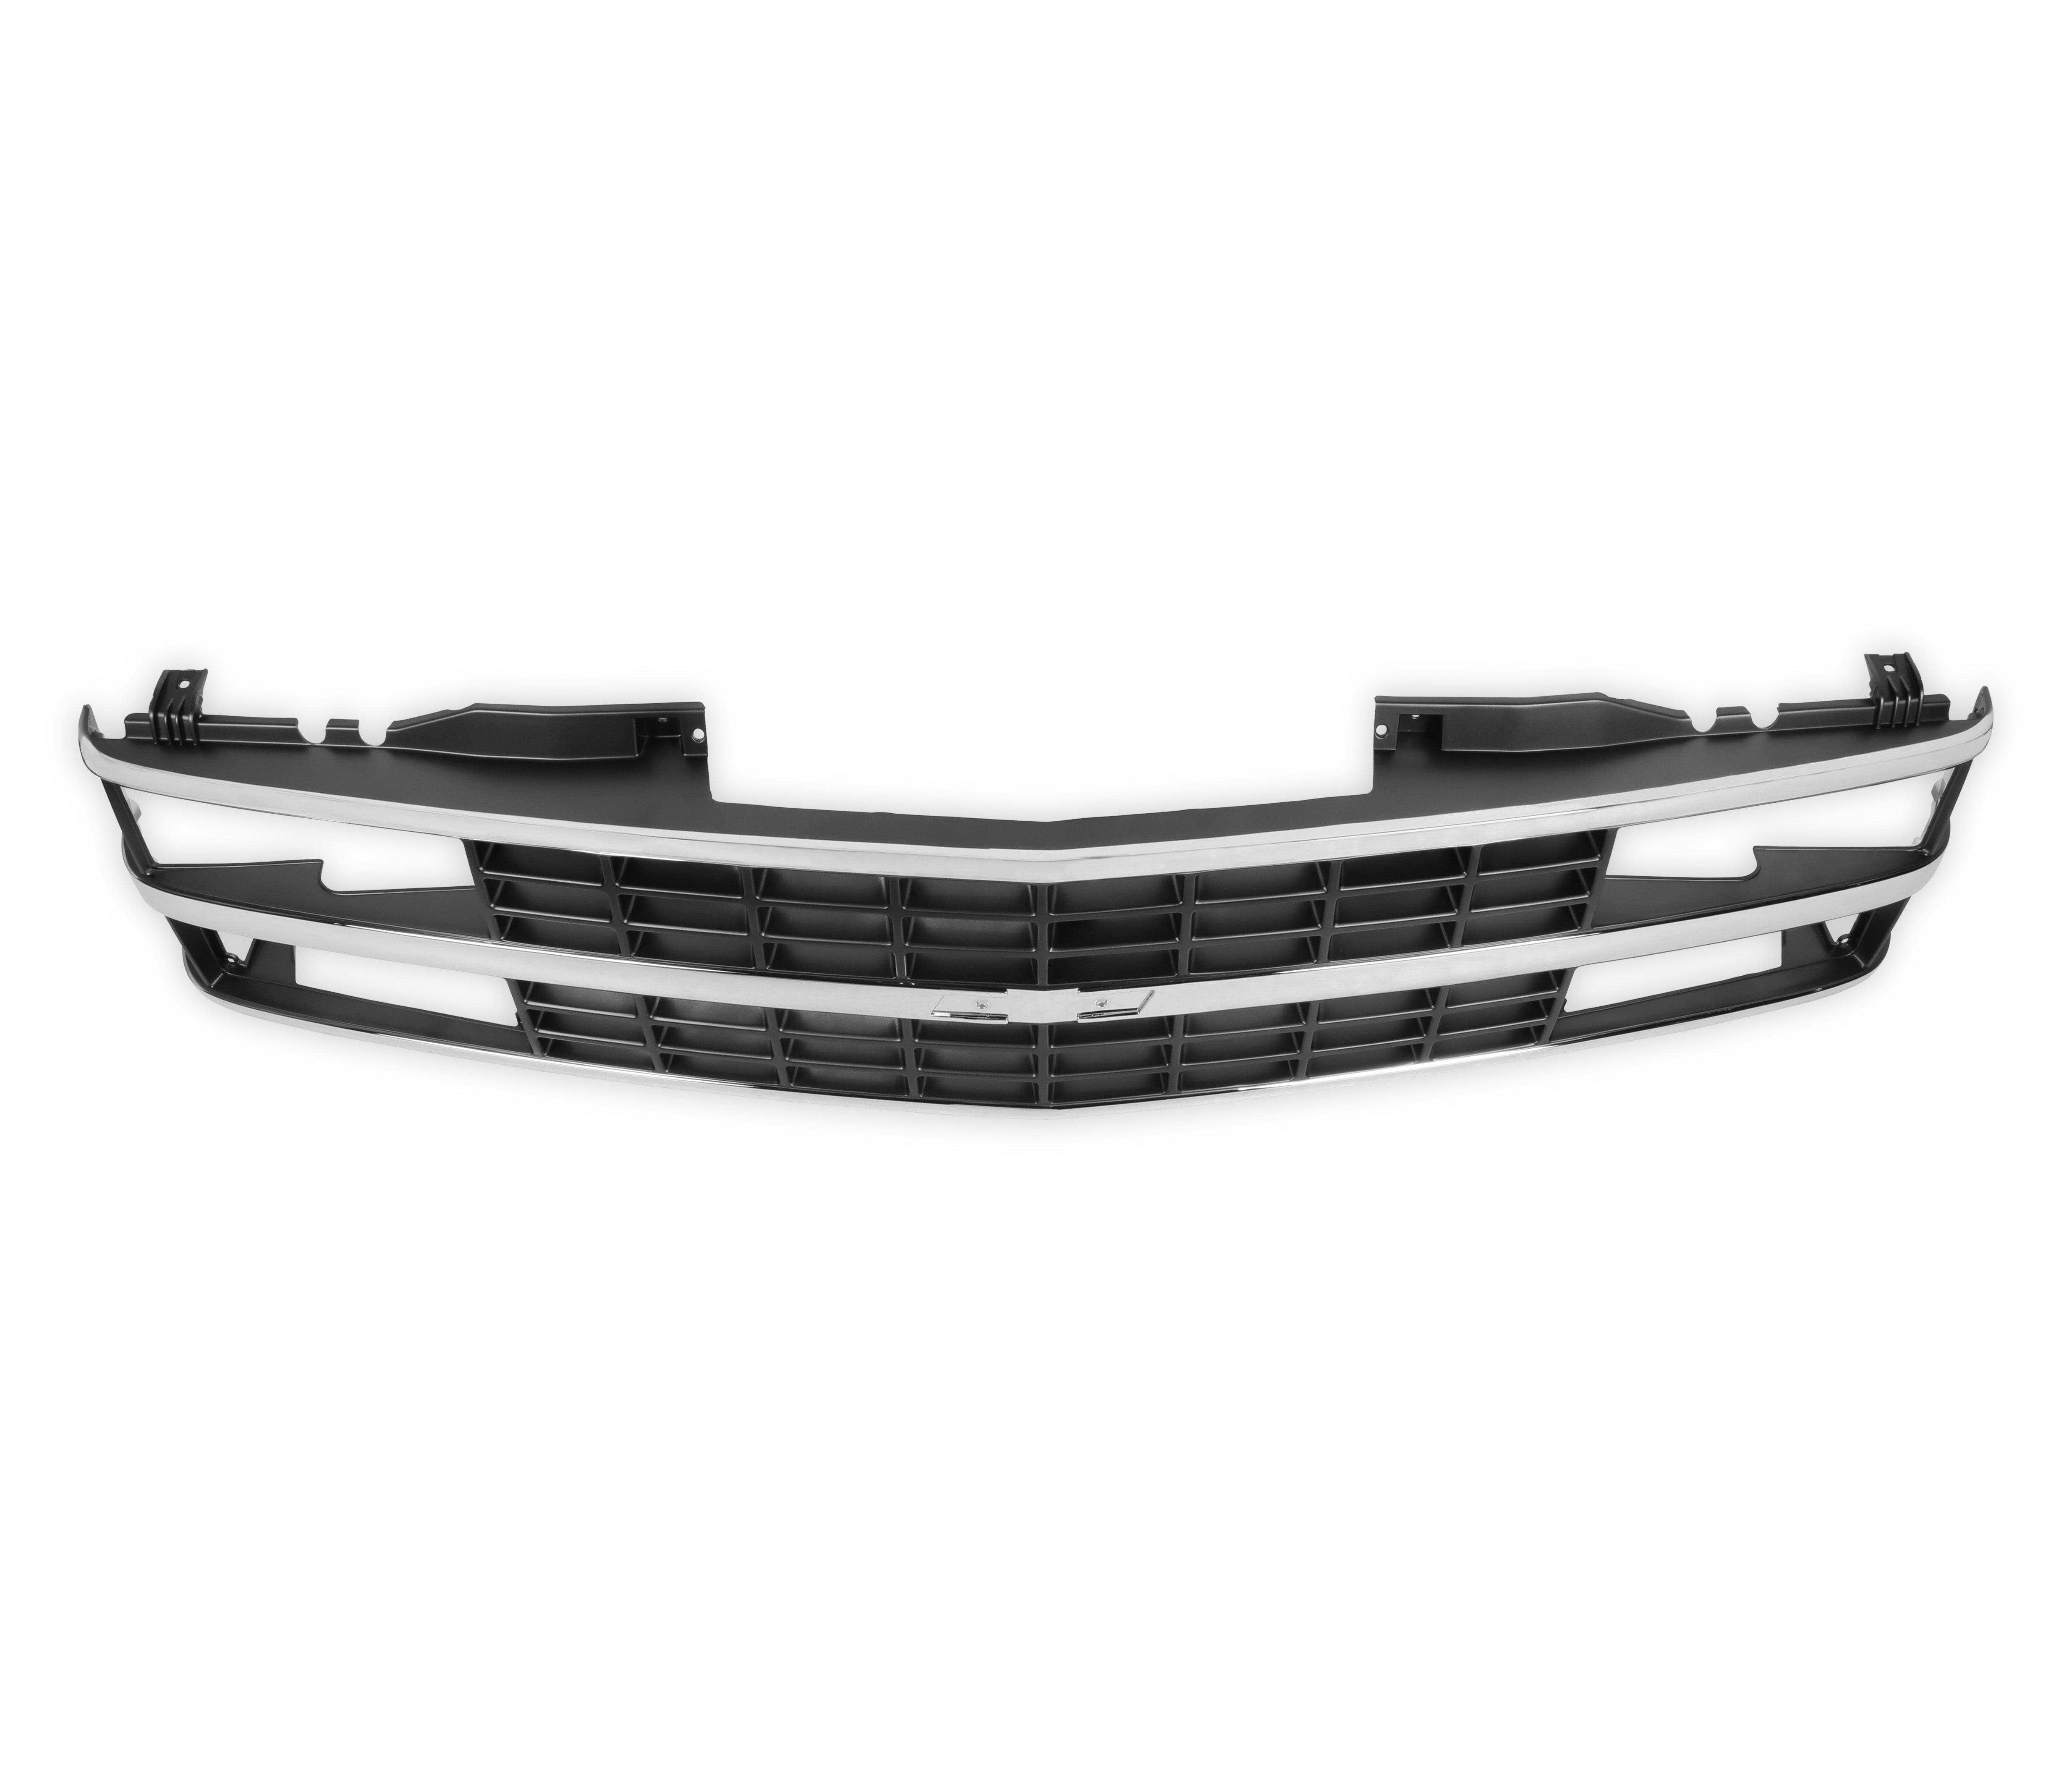 BROTHERS GMT400 Chevy Grille - Dual Headlight - Chrome pn 04-366